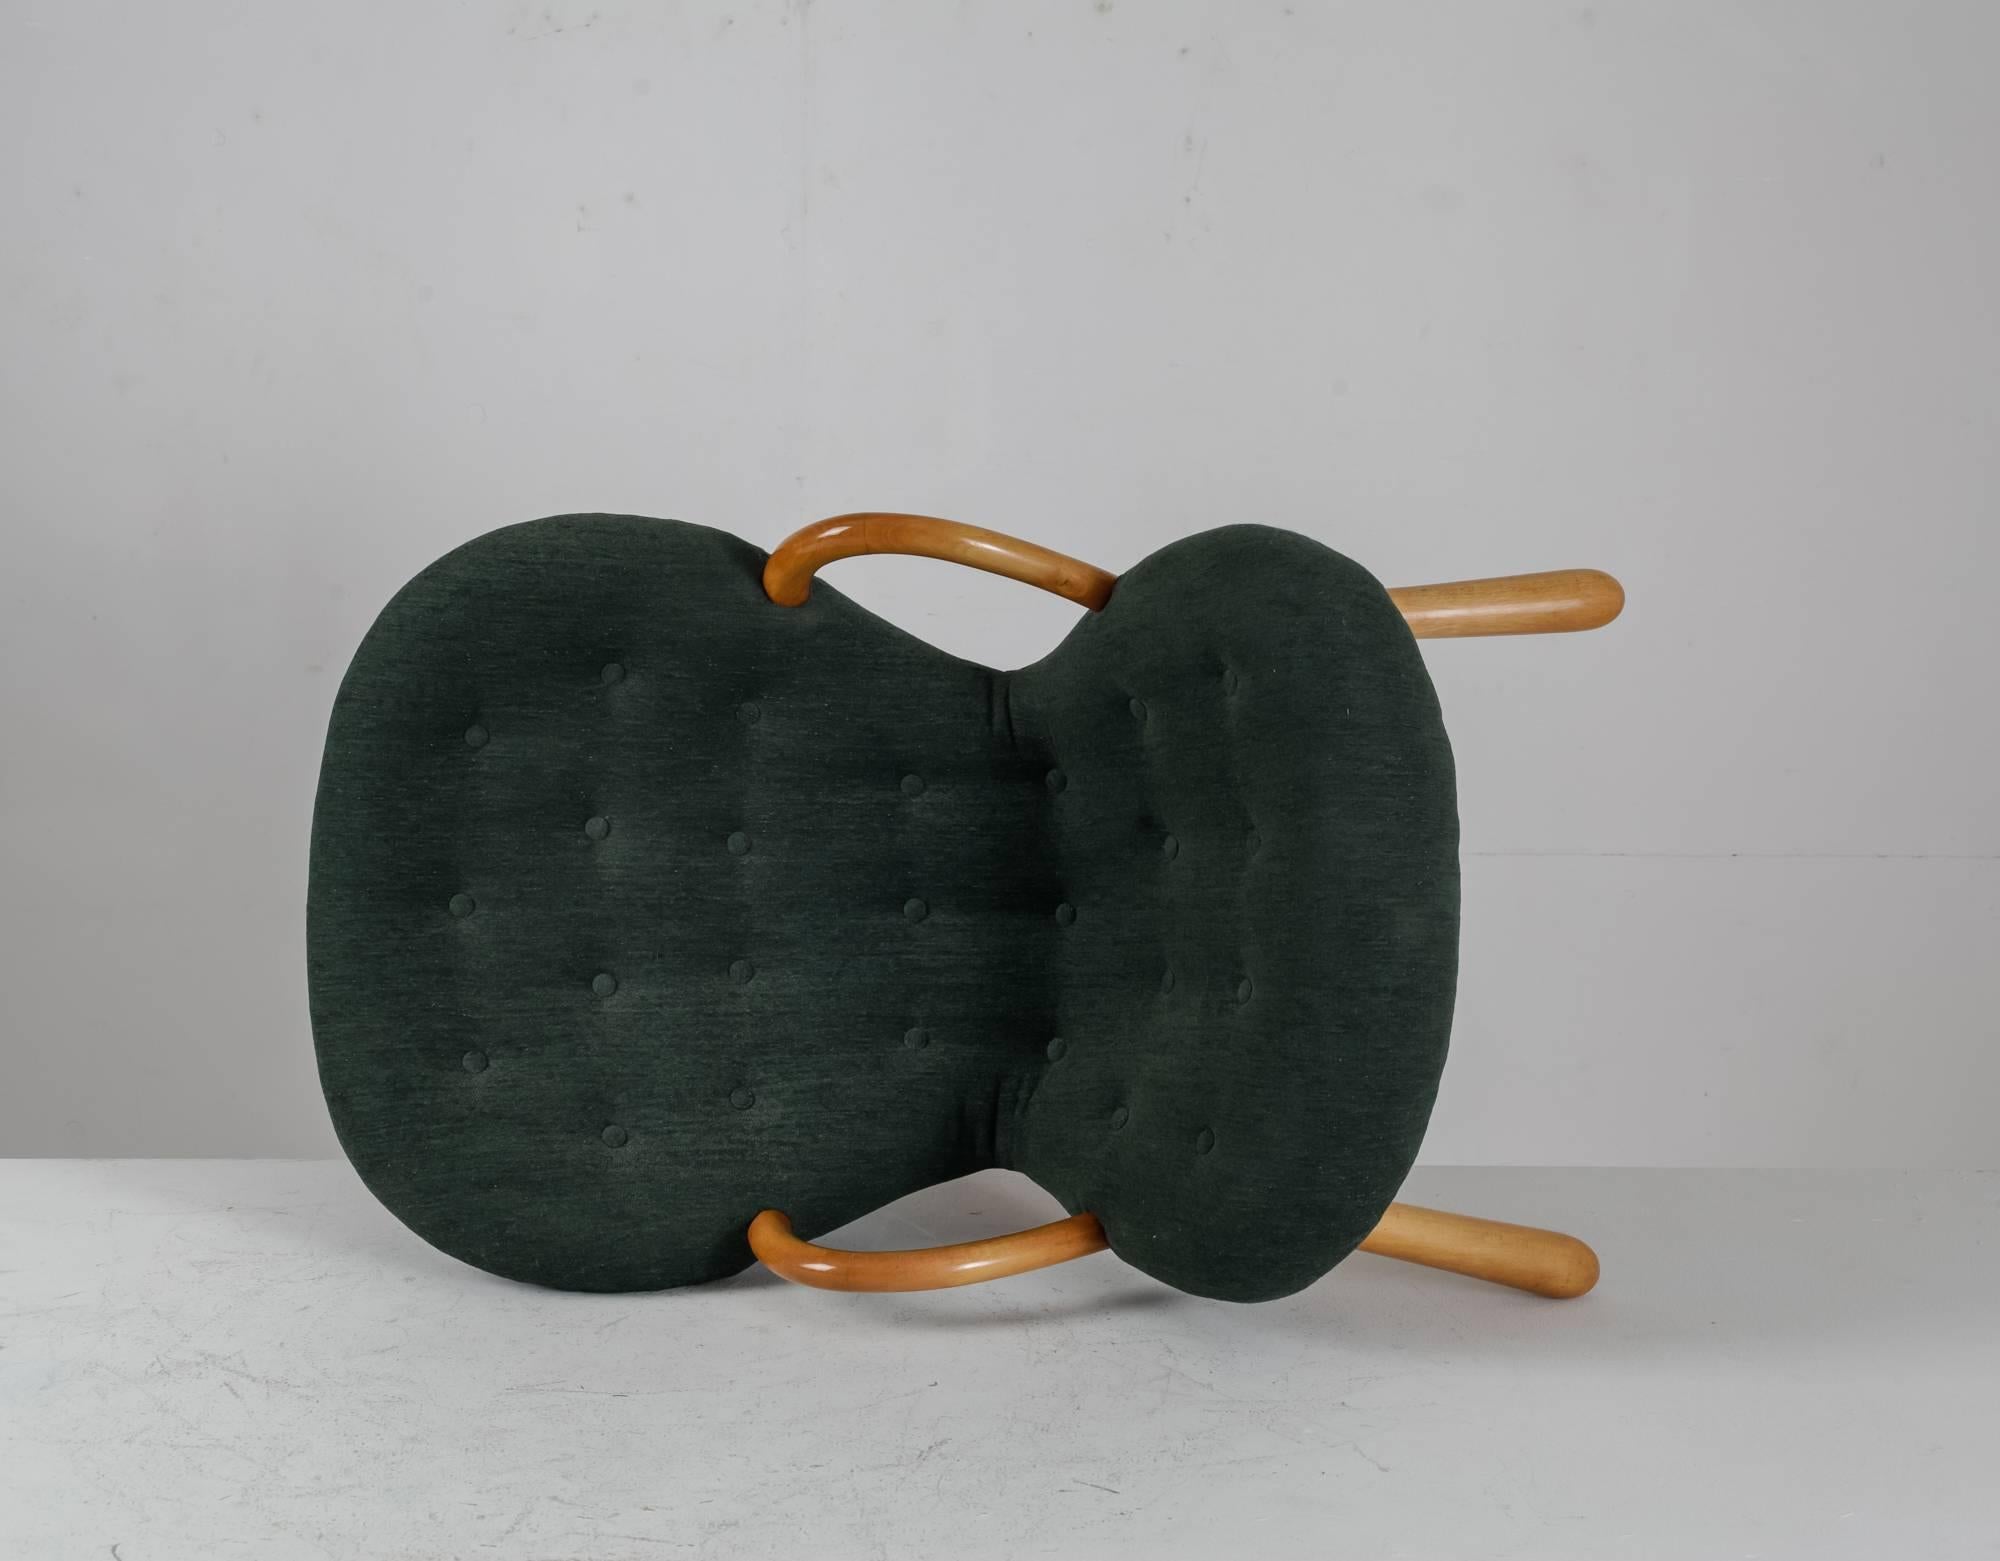 Stained Philip Arctander Clam Chair with Green Upholstery, Denmark, 1940s For Sale